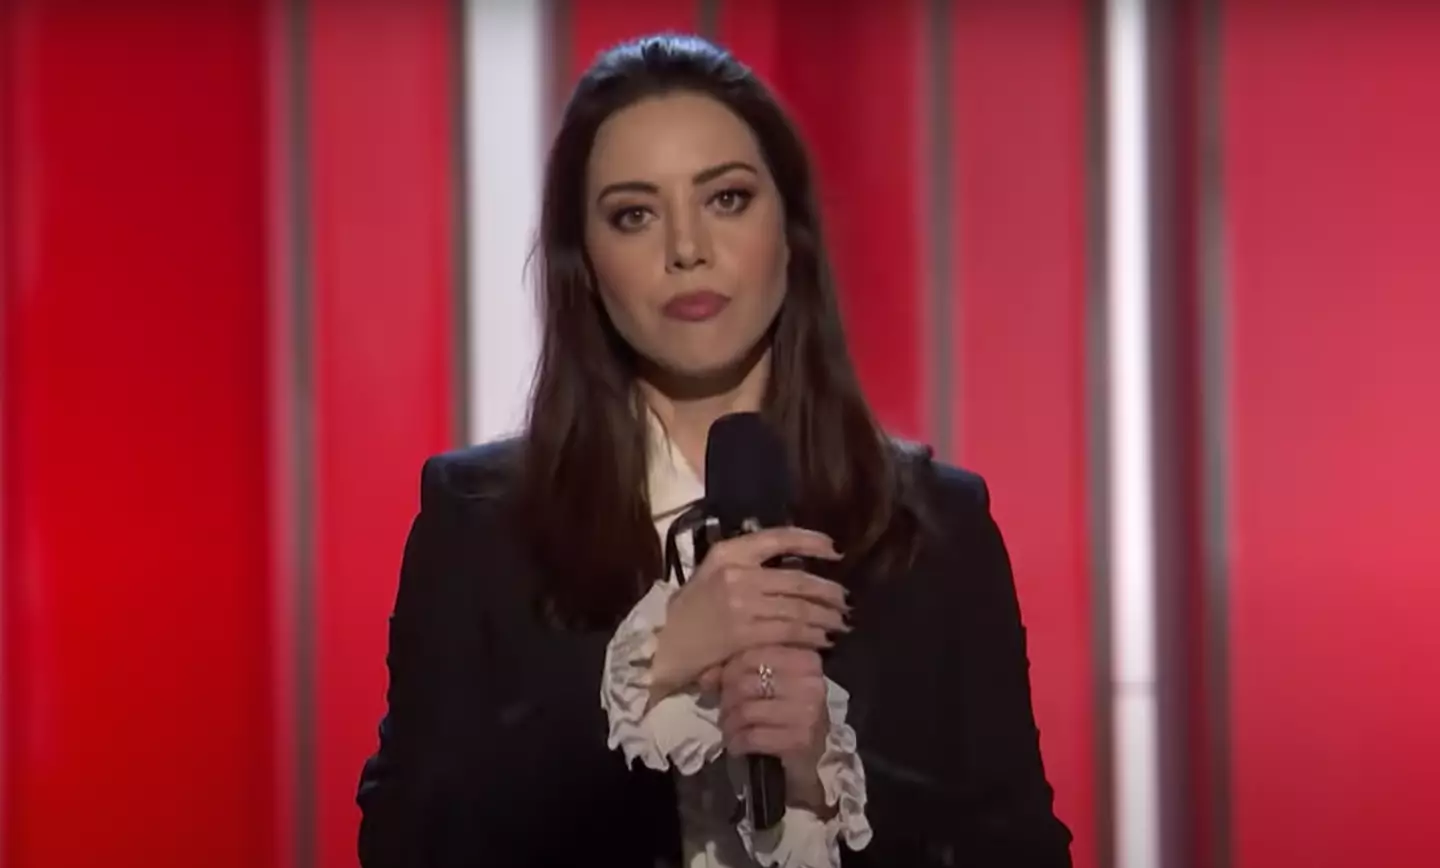 Aubrey Plaza is the perfect awards show host.